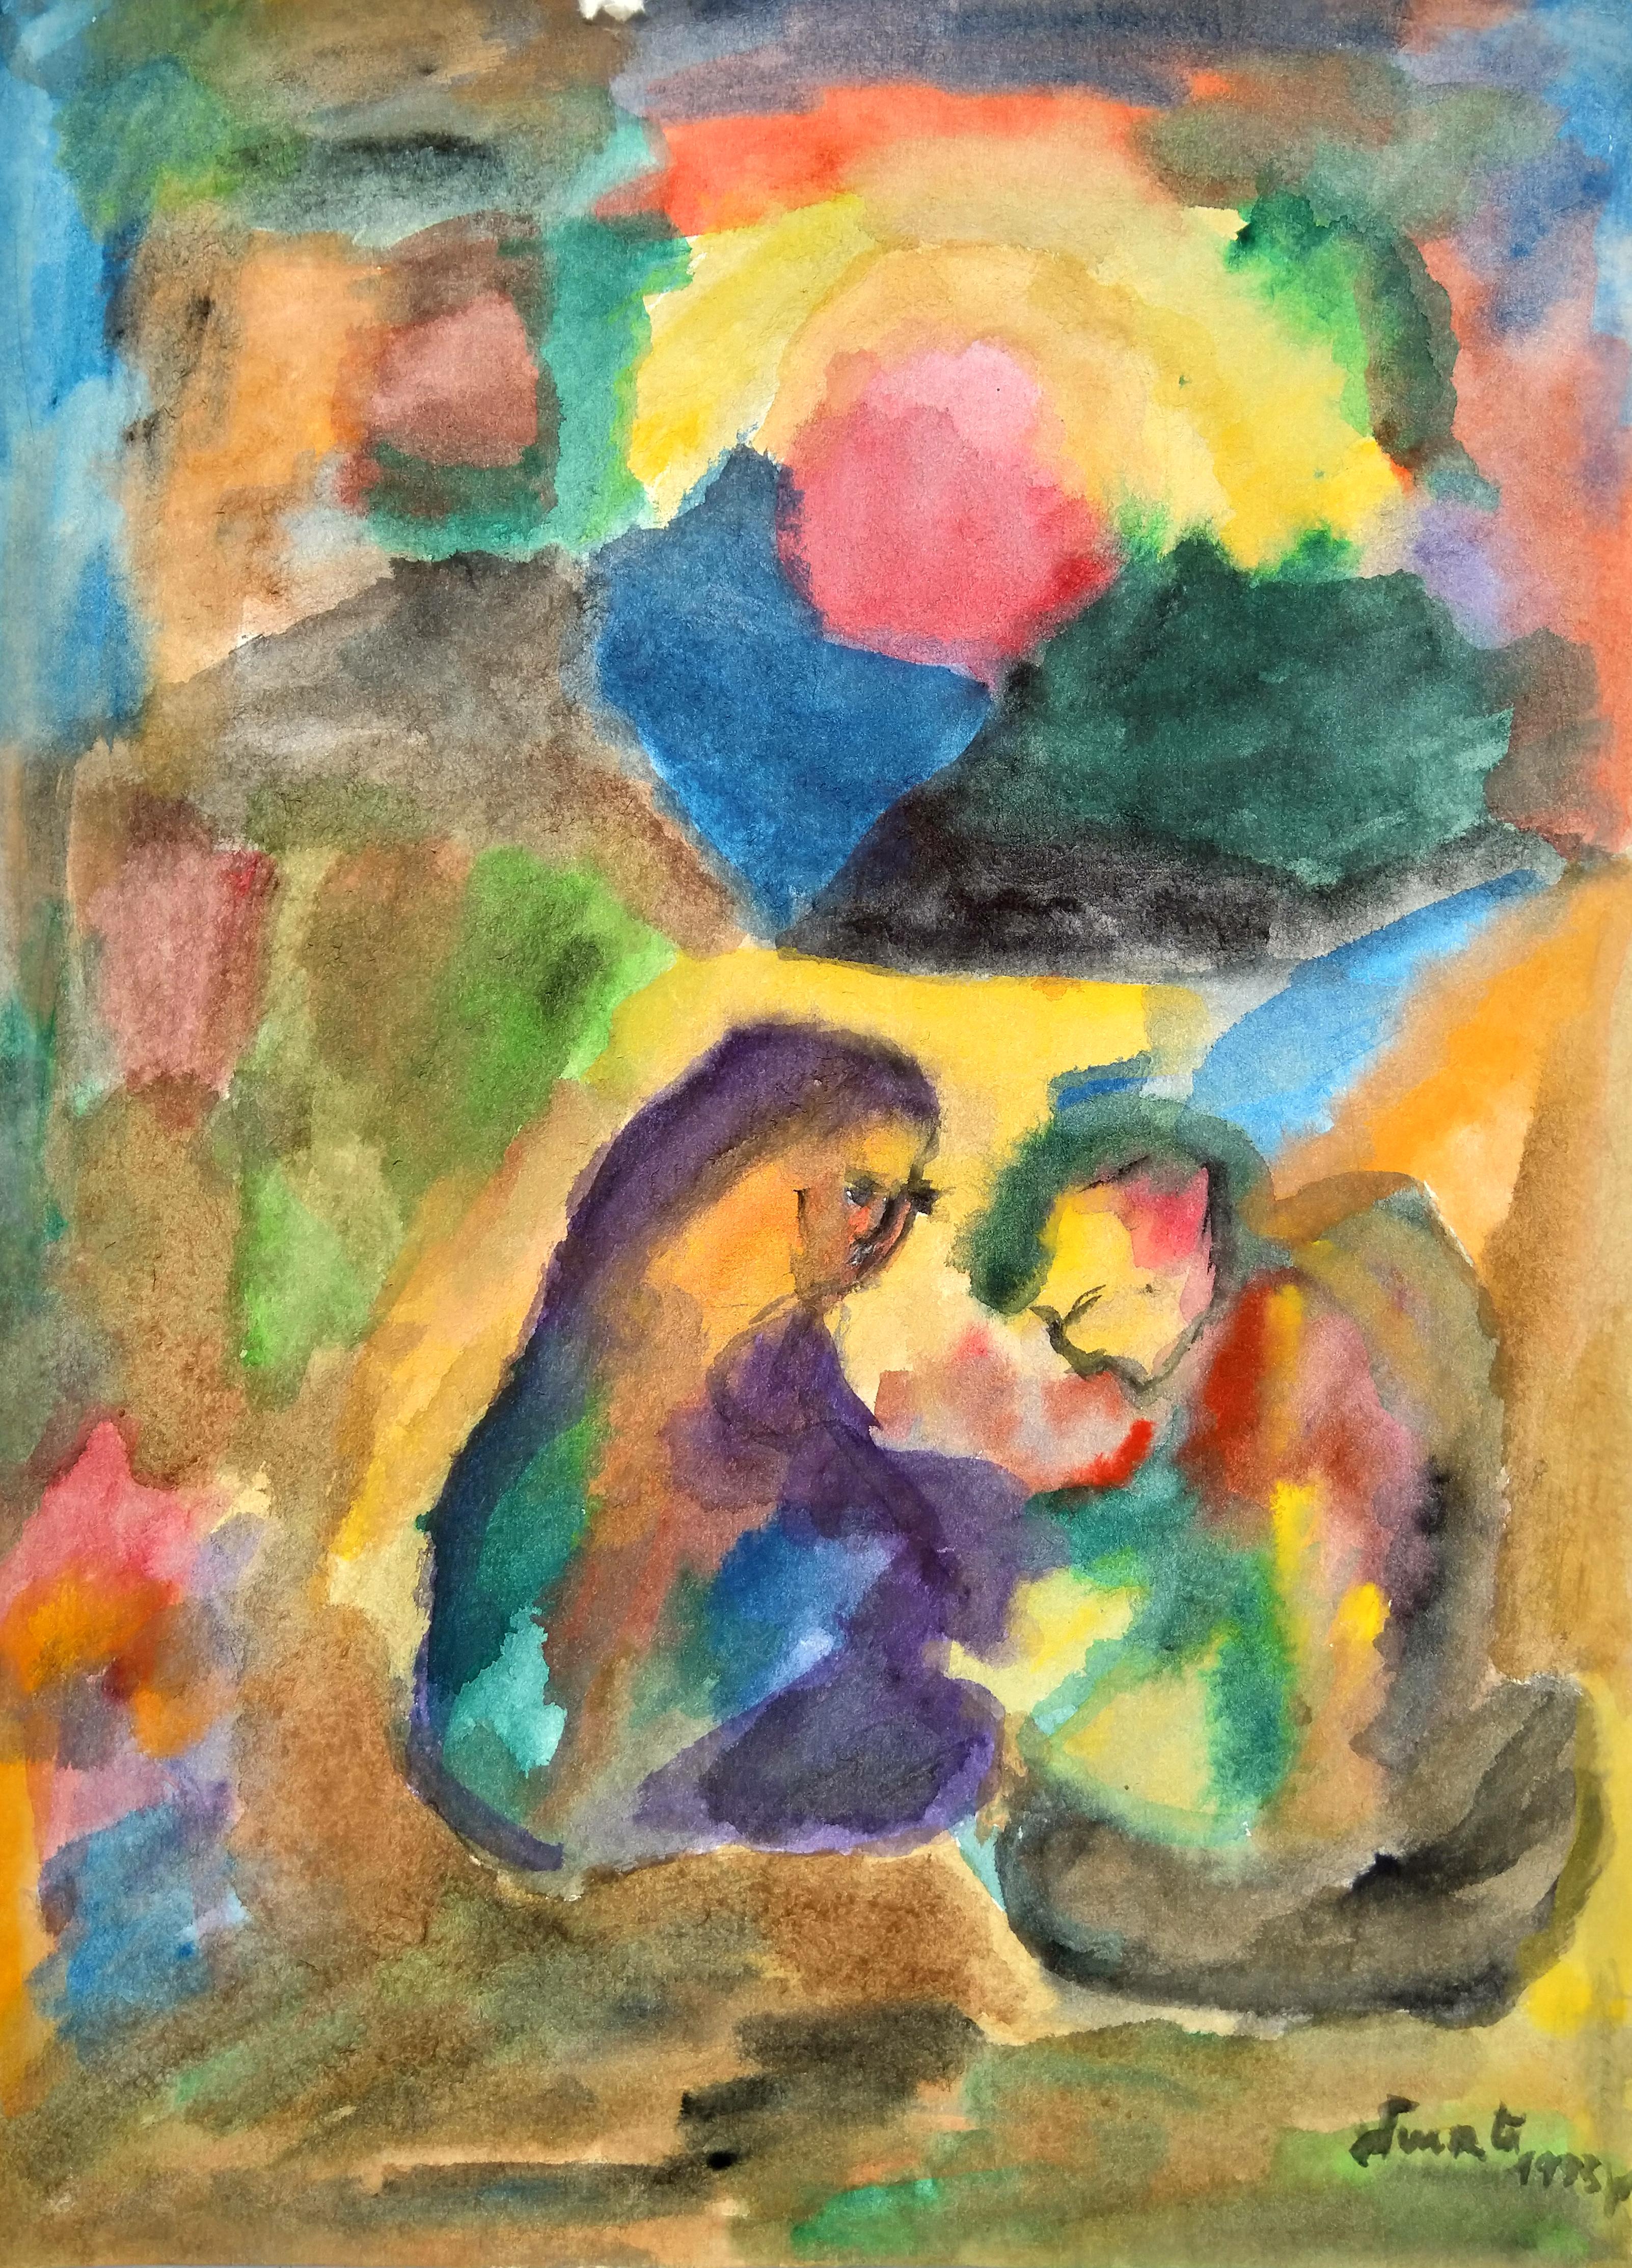 Watercolor on paper, Framed 54 x 44 x 2 cm